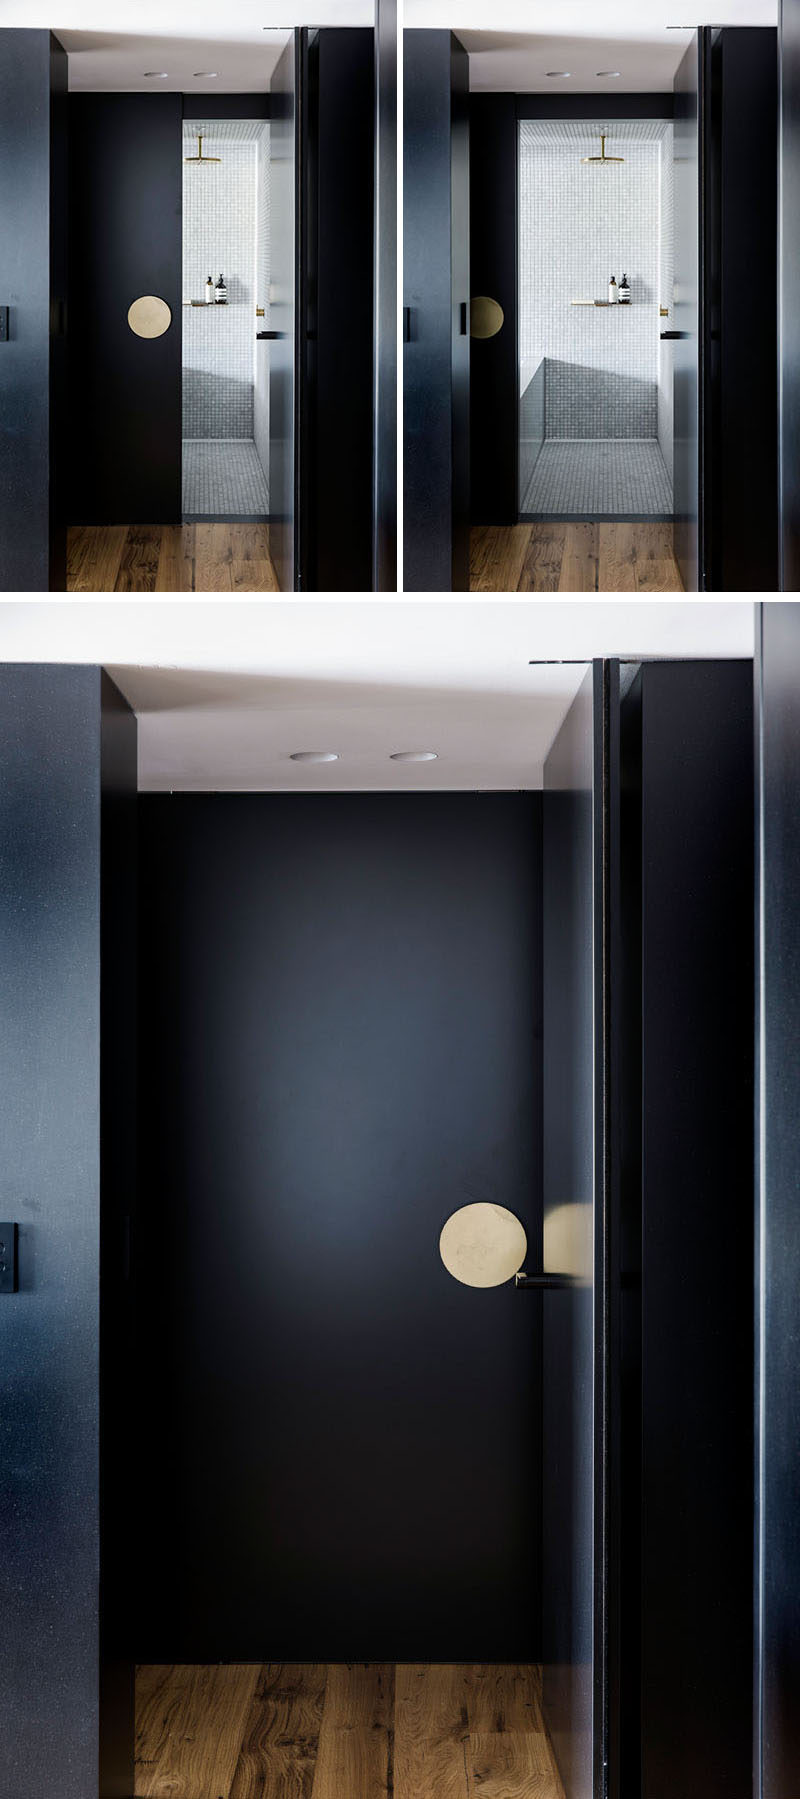 This modern bathroom has a large sliding black door with an over-sized door handle.